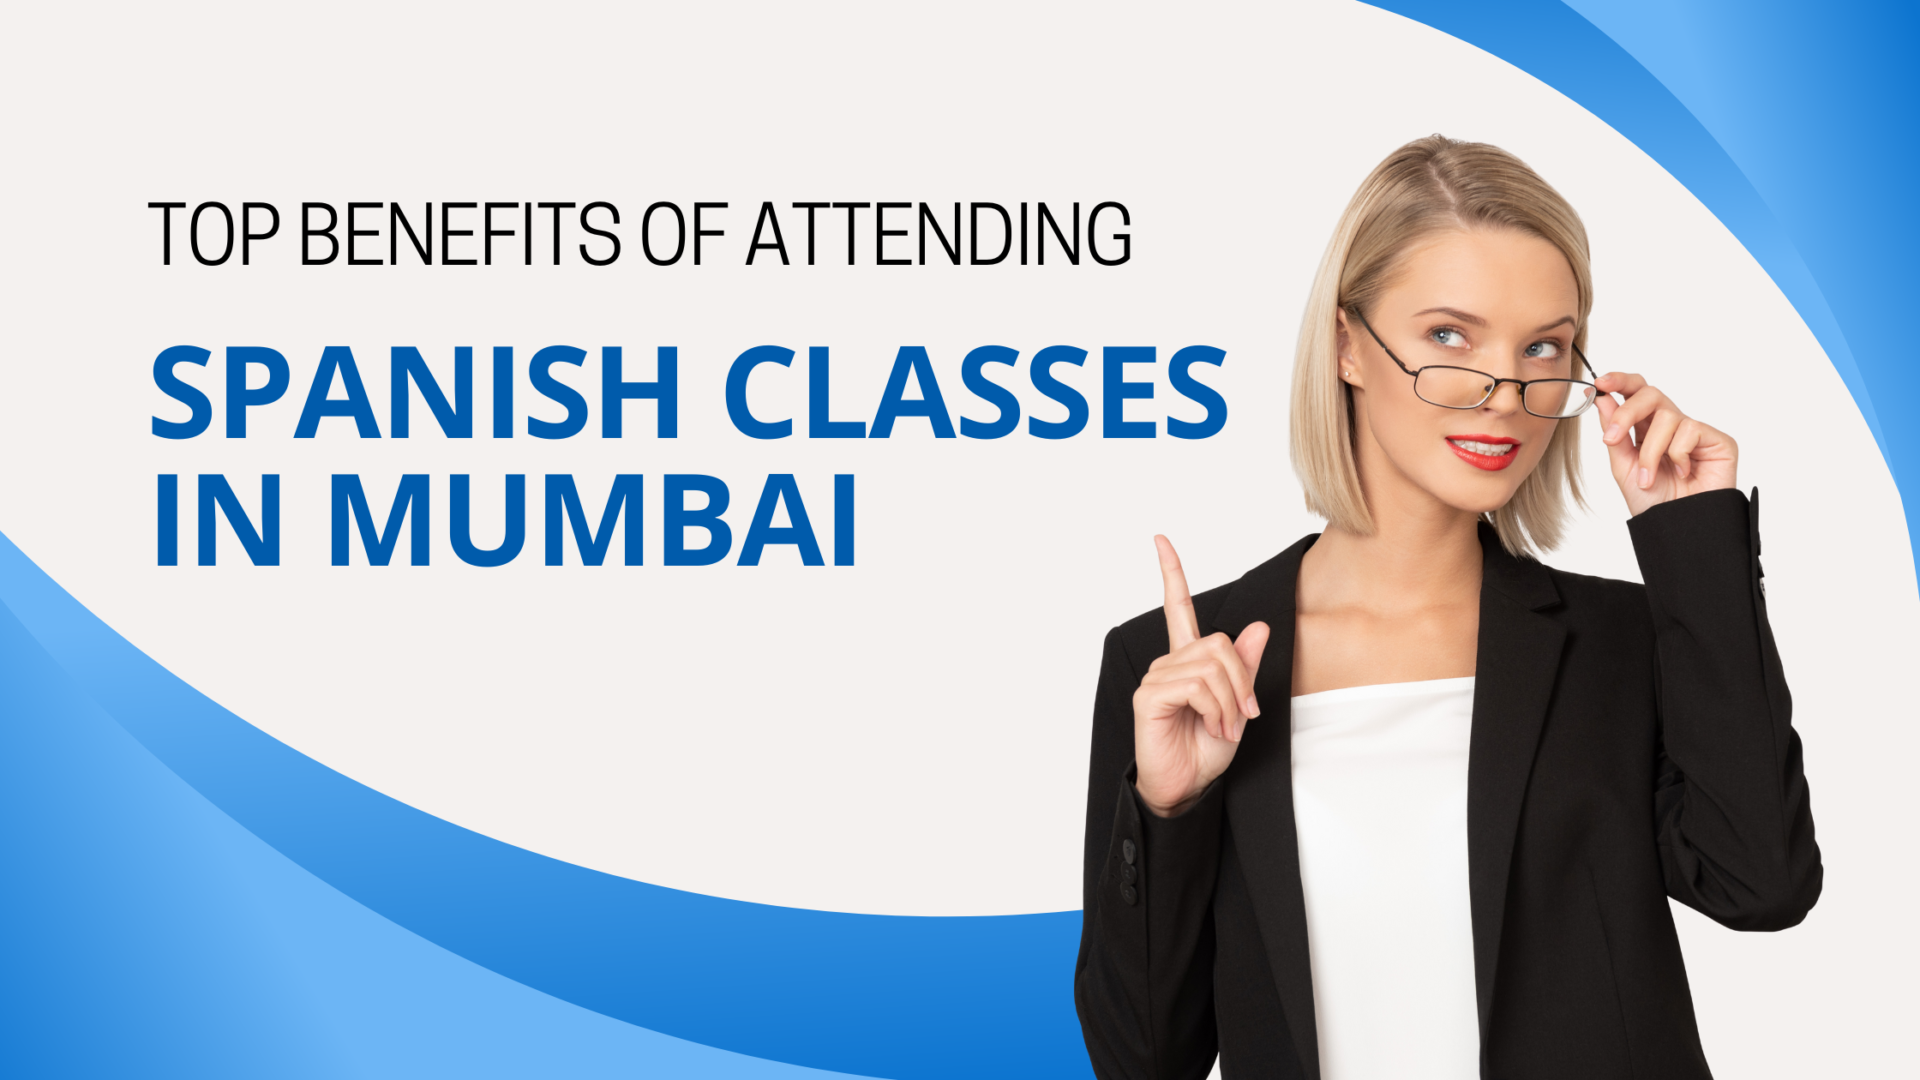 What Are The Top Benefits of Attending Spanish Classes in Mumbai?